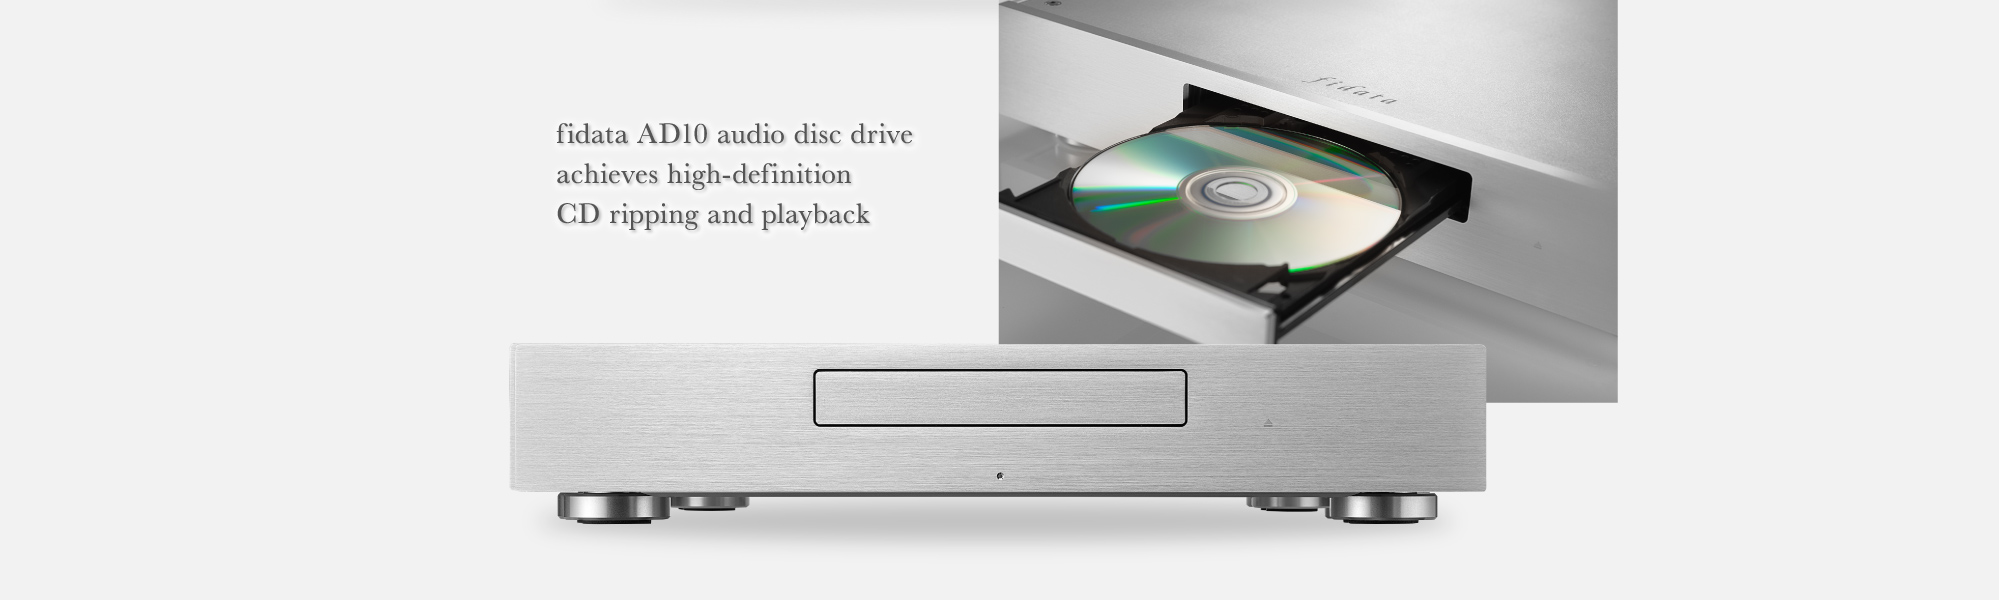 fidata AD10 audio disc drive achieves high-definition CD ripping and playback